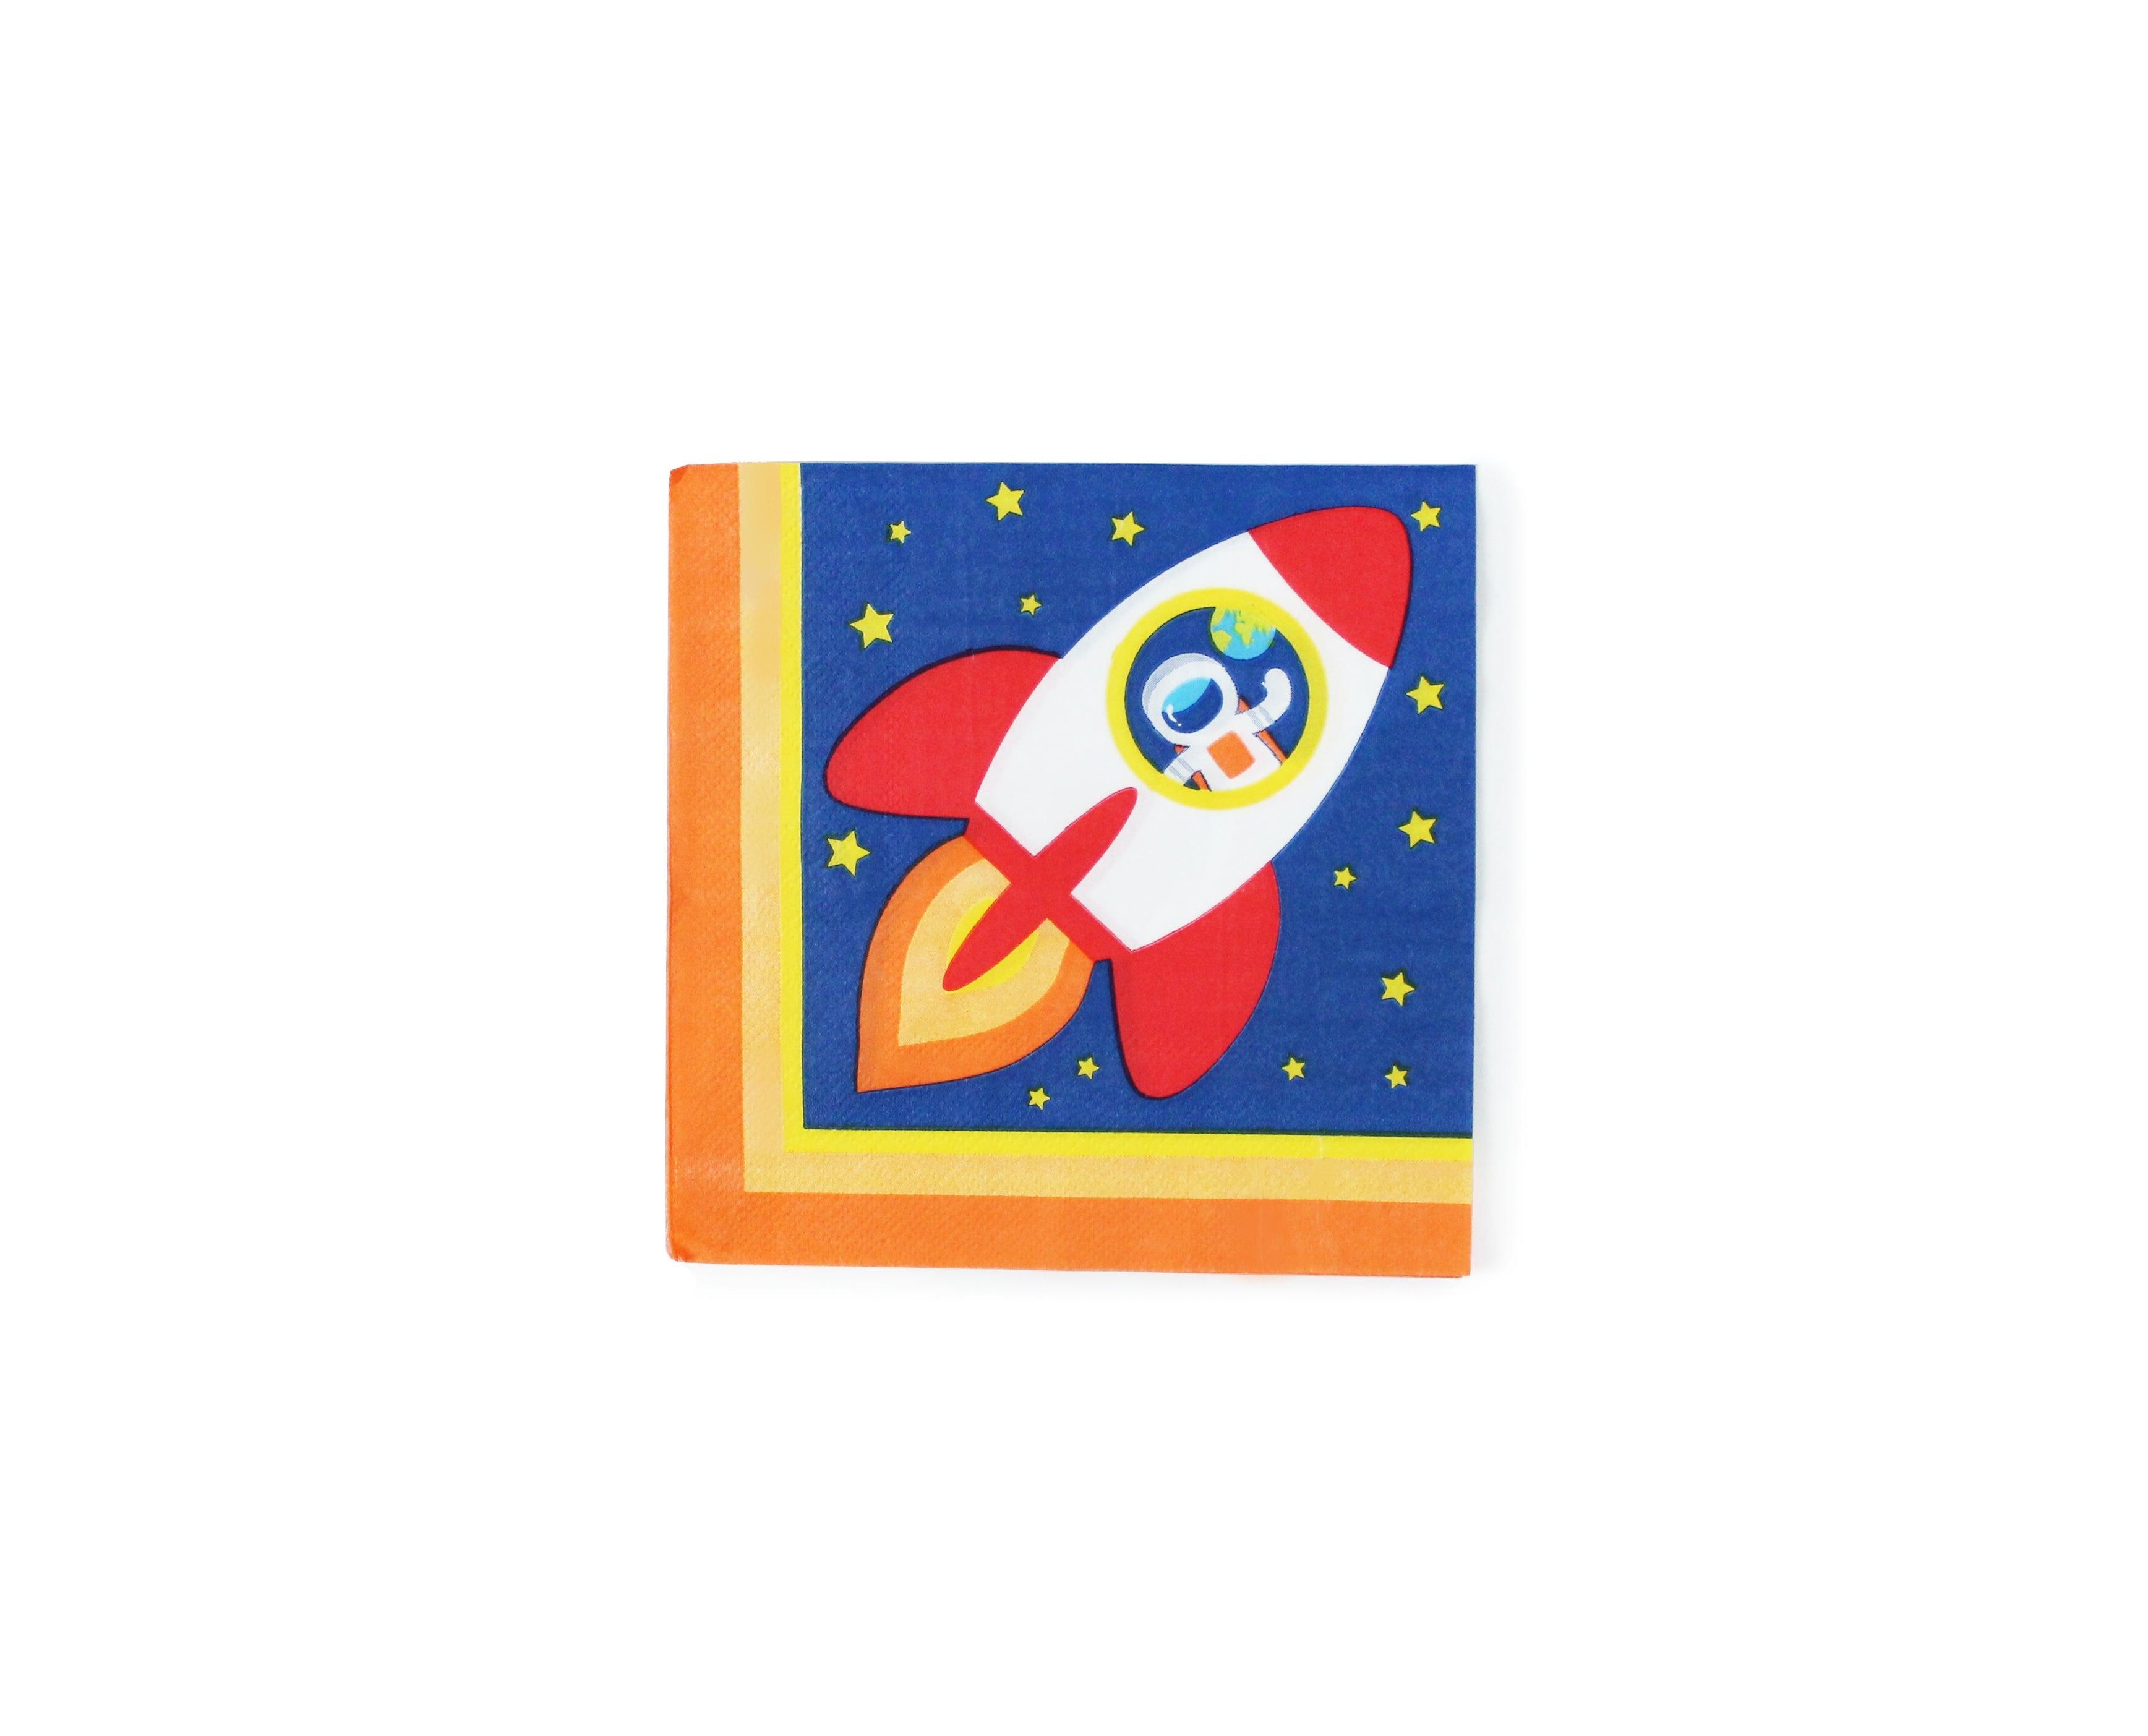 Space Party Napkins, 24 Ct